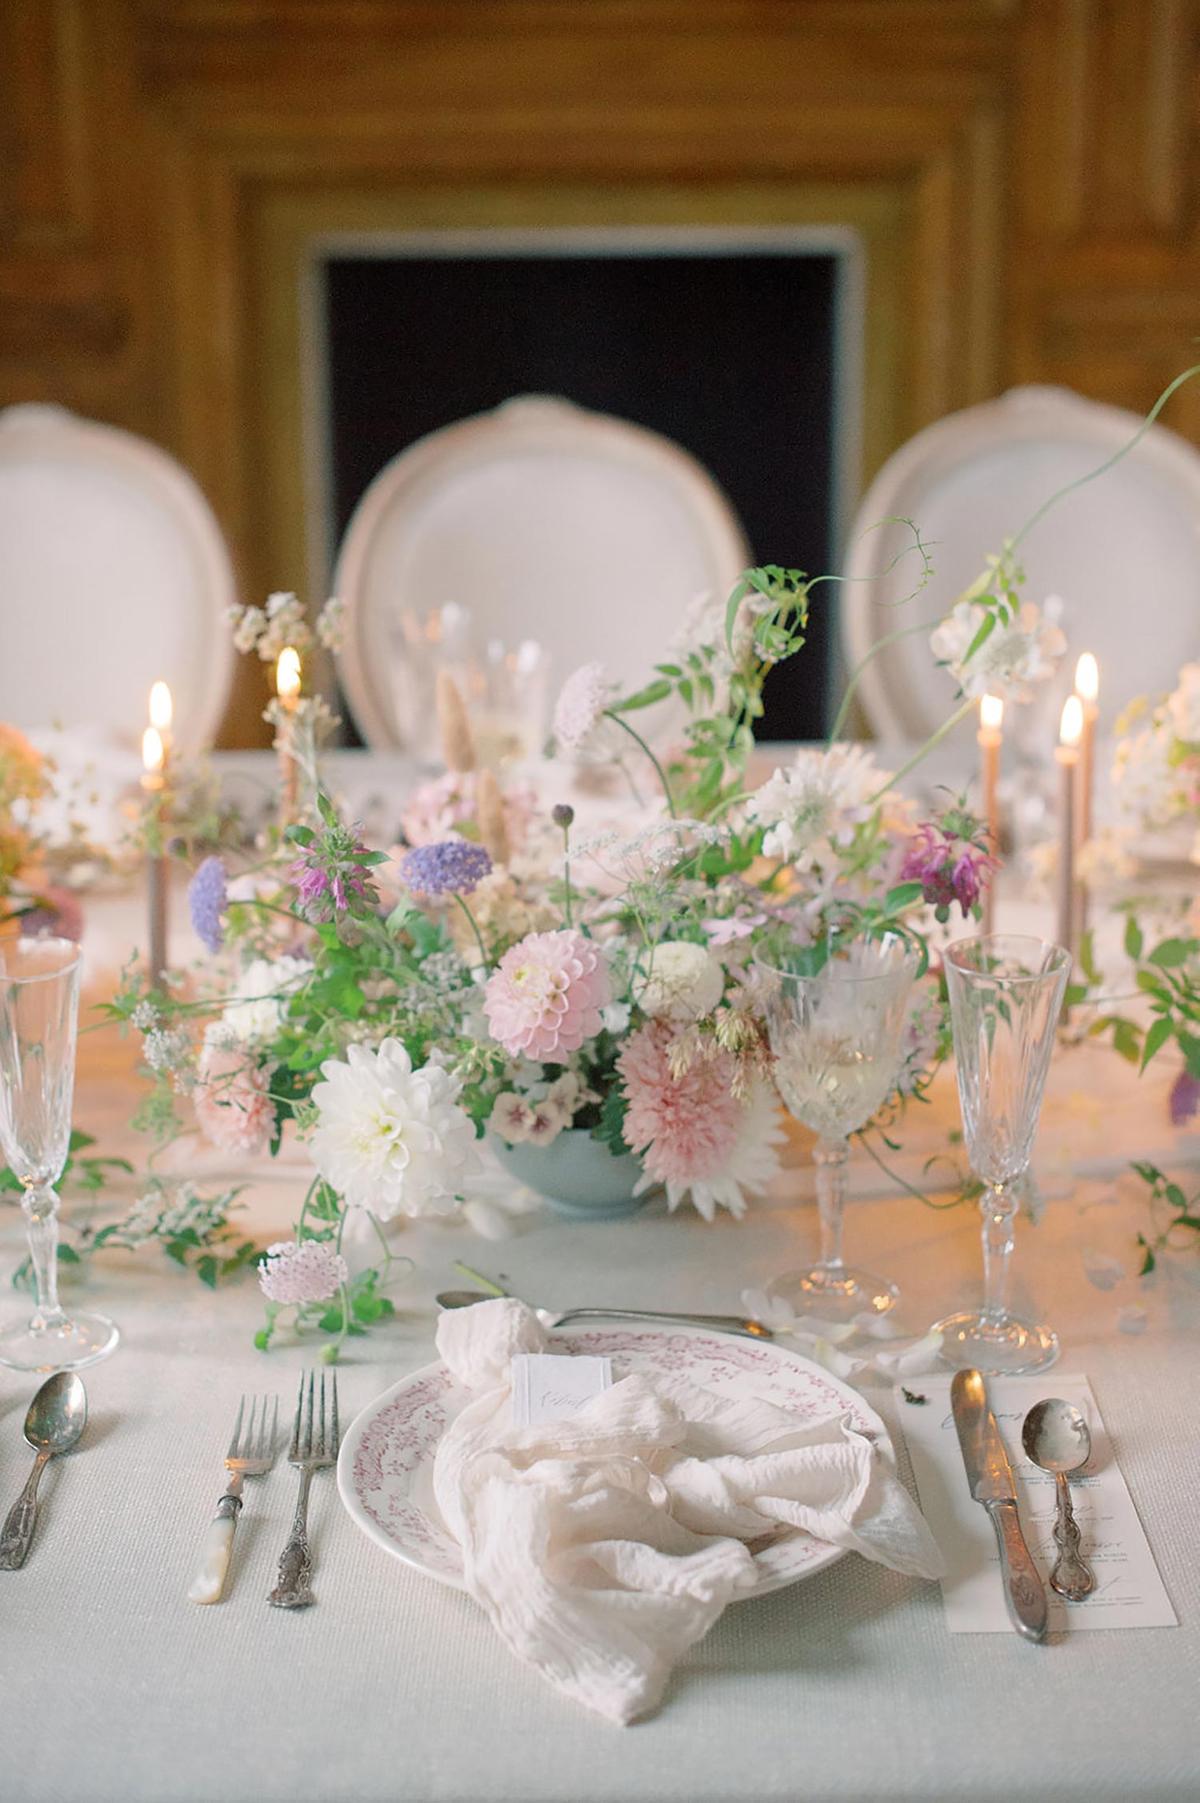 spring ballroom wedding reception with a neutral table linen, soft silk runner and low garden centerpieces mixed with skinny taper candles; photography by Julie Livingston at an English country estate Hedsor House with planning and design by Willow and Oak Events